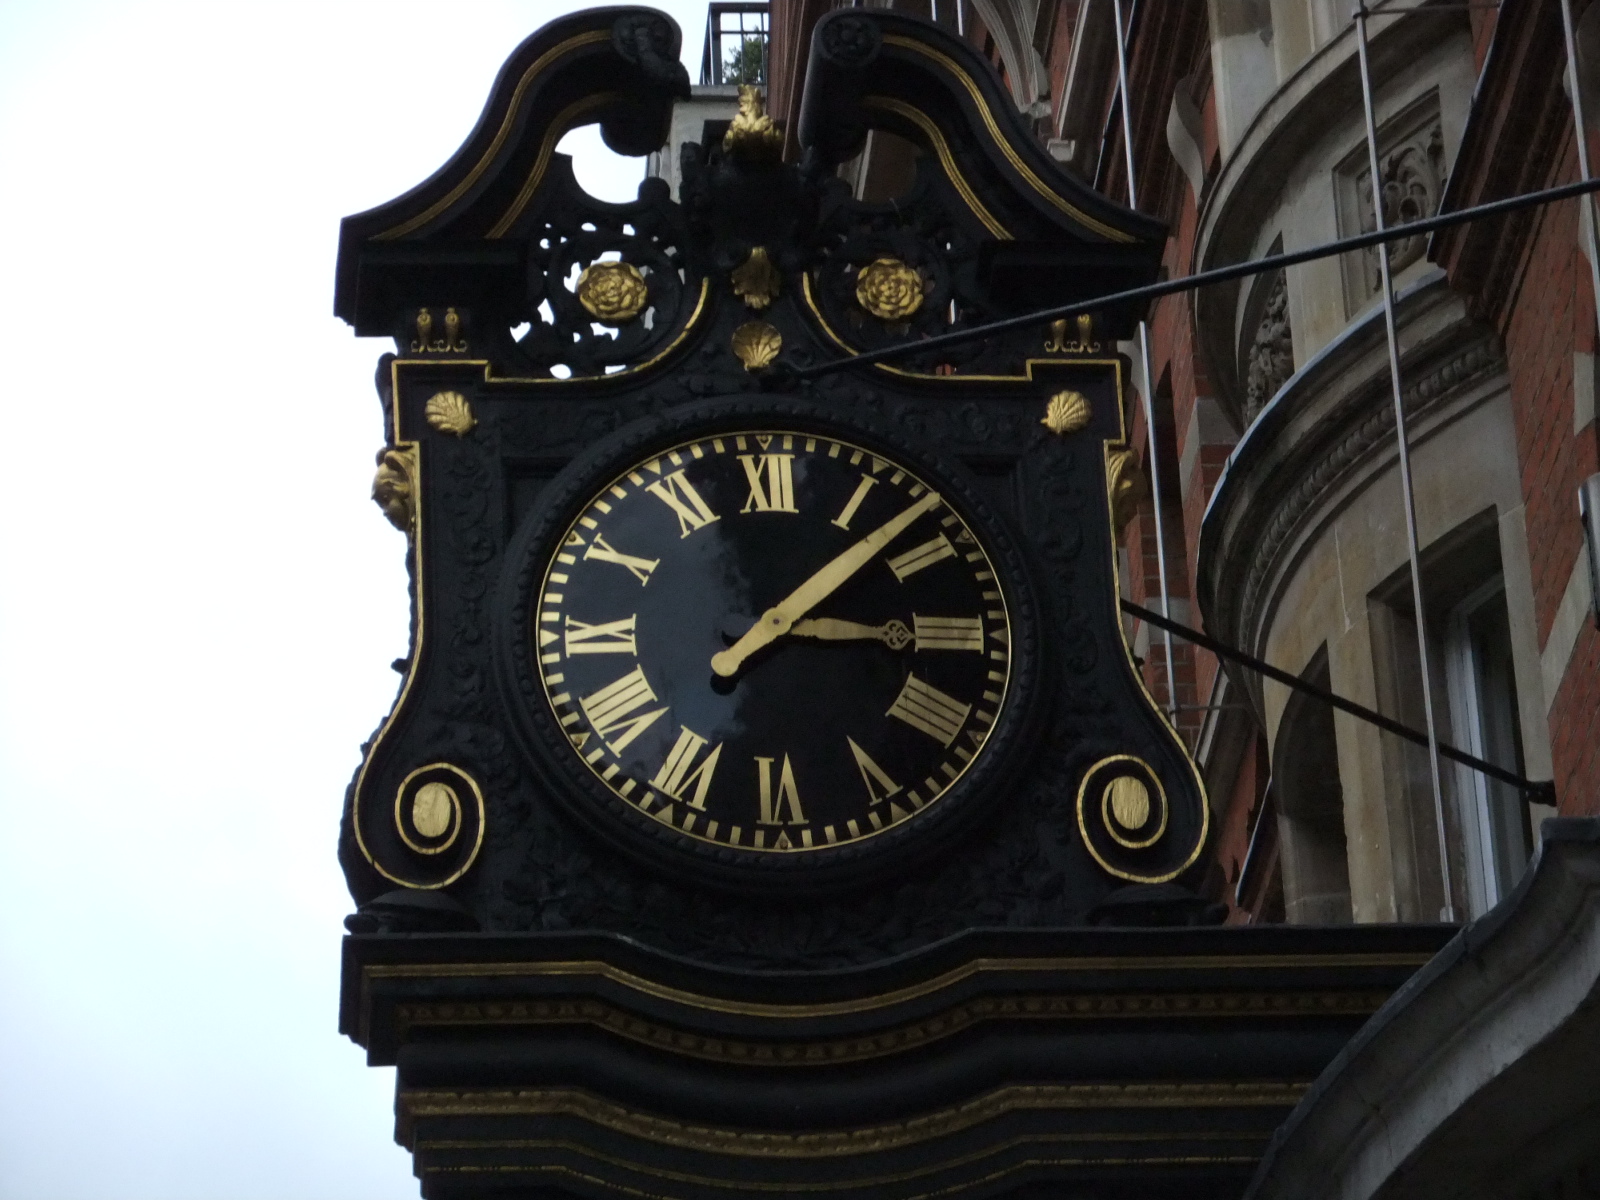 an ornate clock showing 3 55 in the face